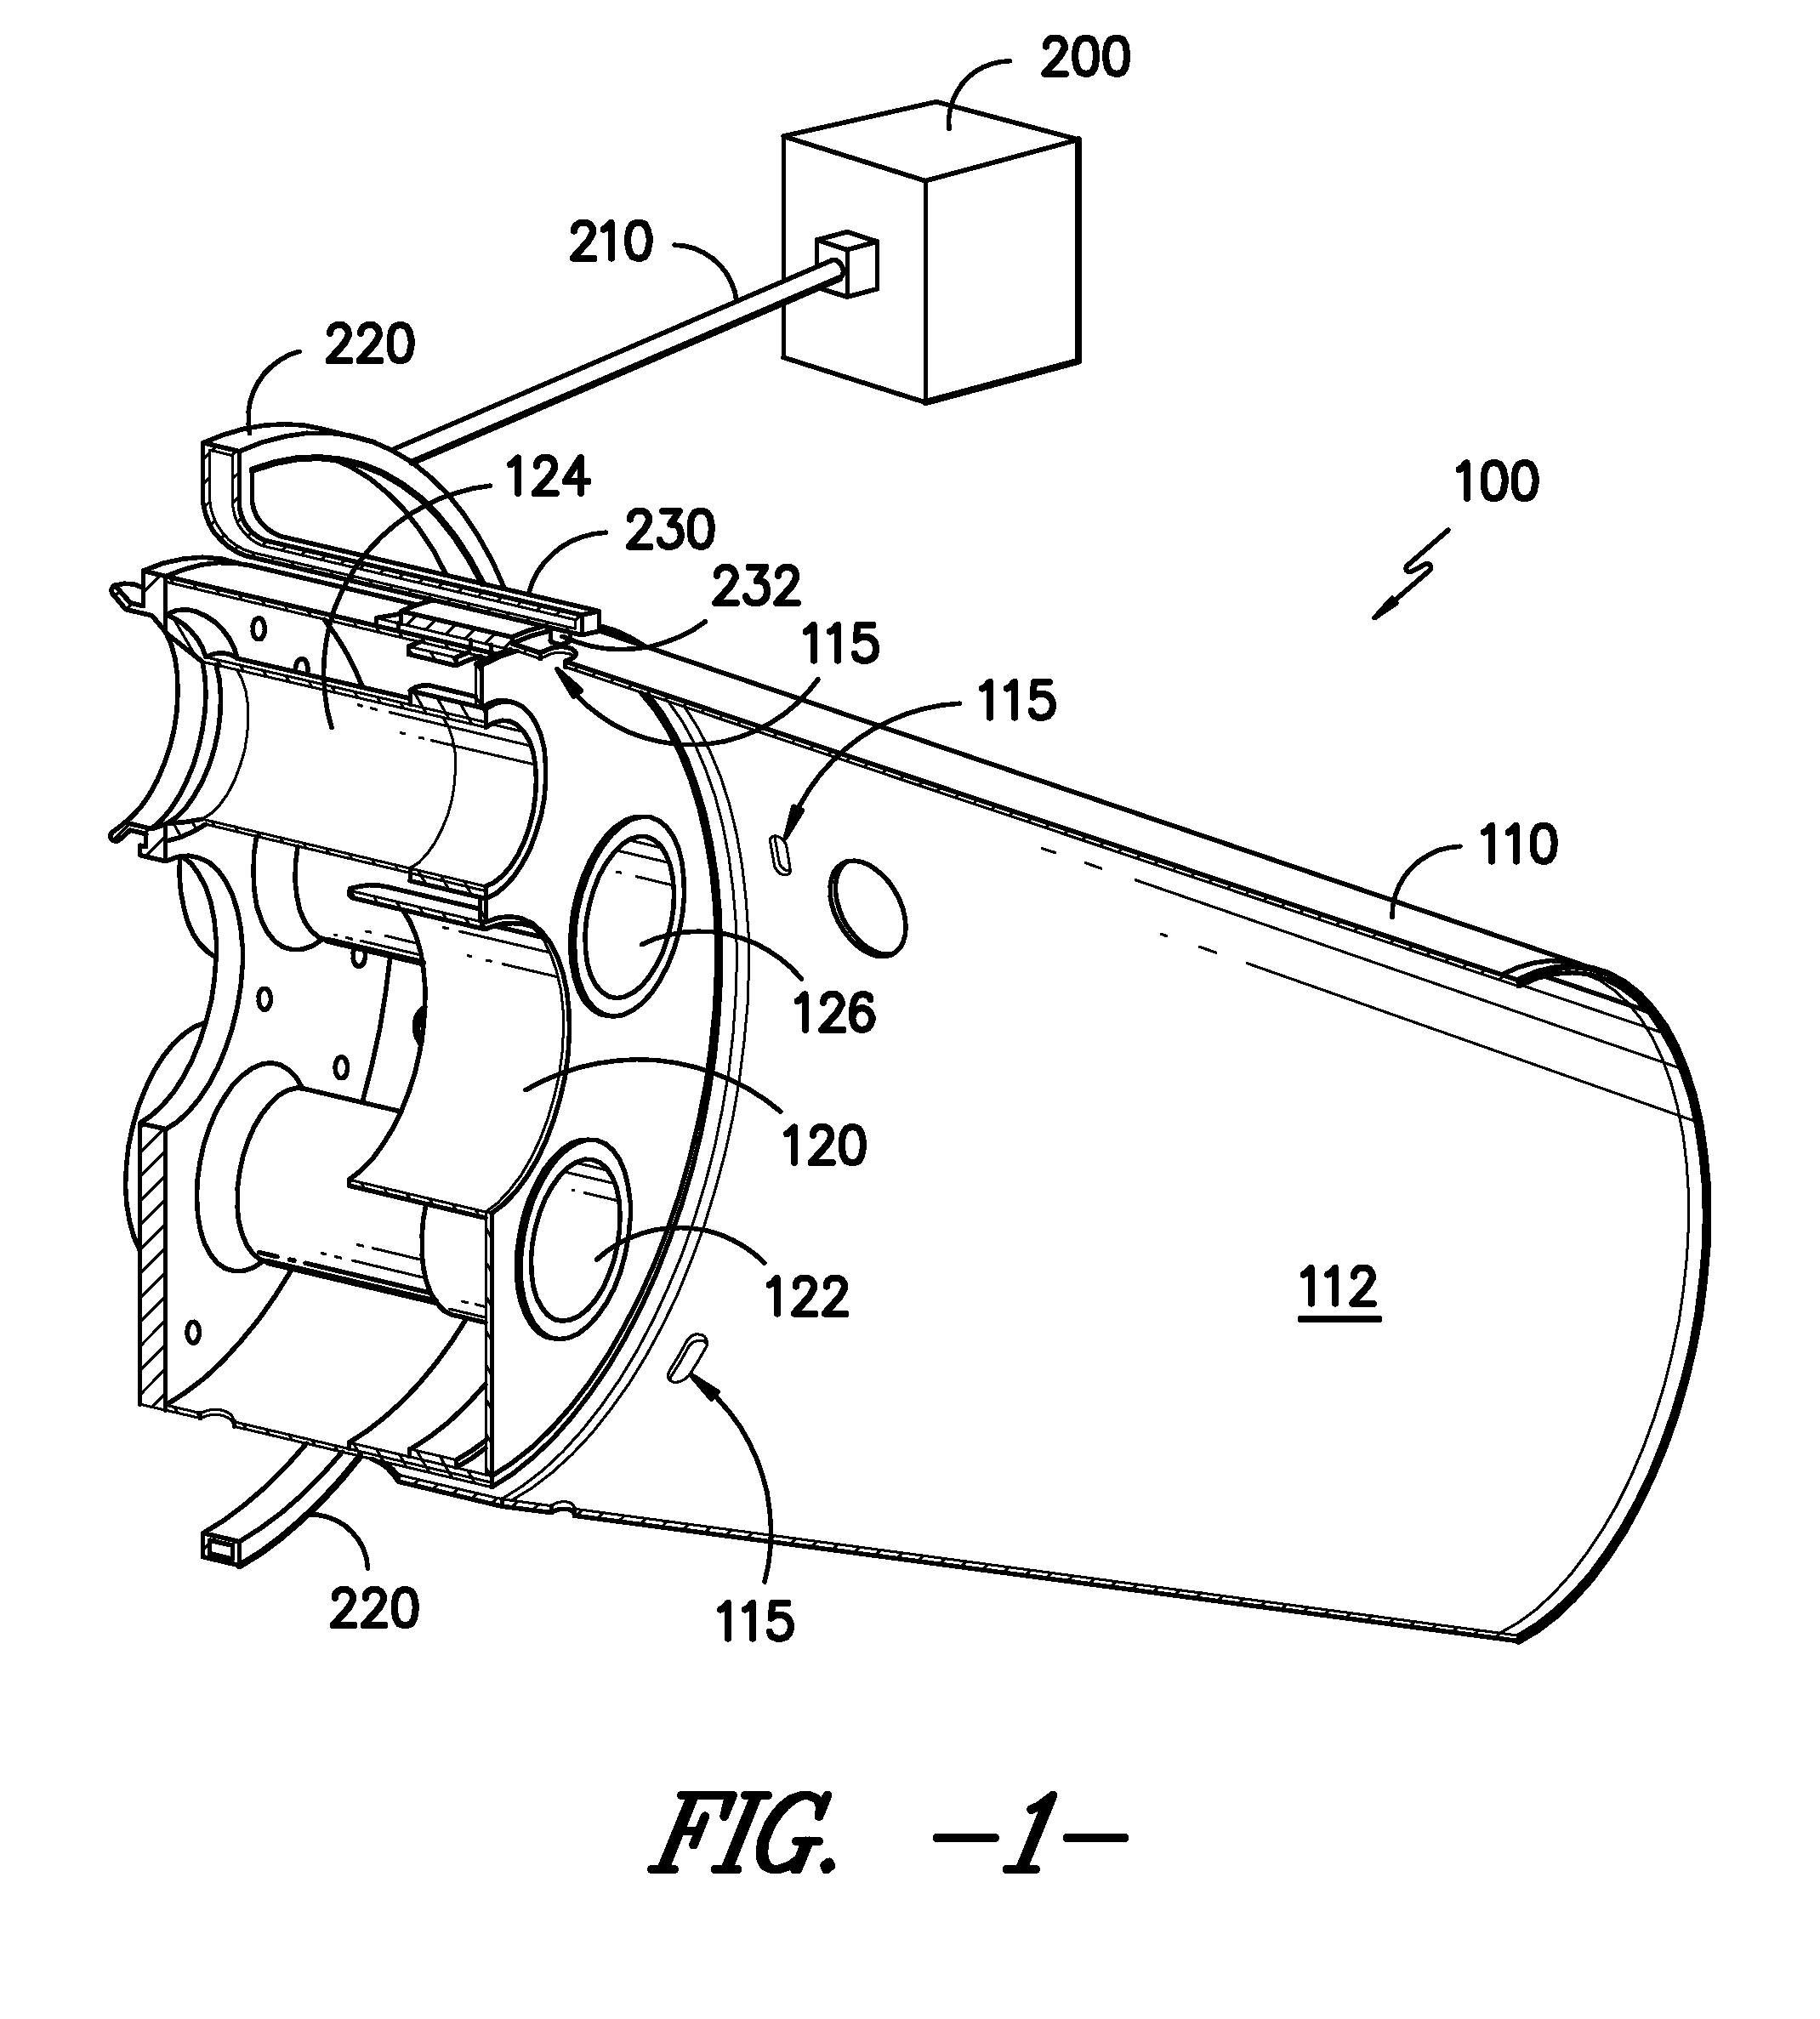 Apparatus for high-frequency electromagnetic initiation of a combustion process